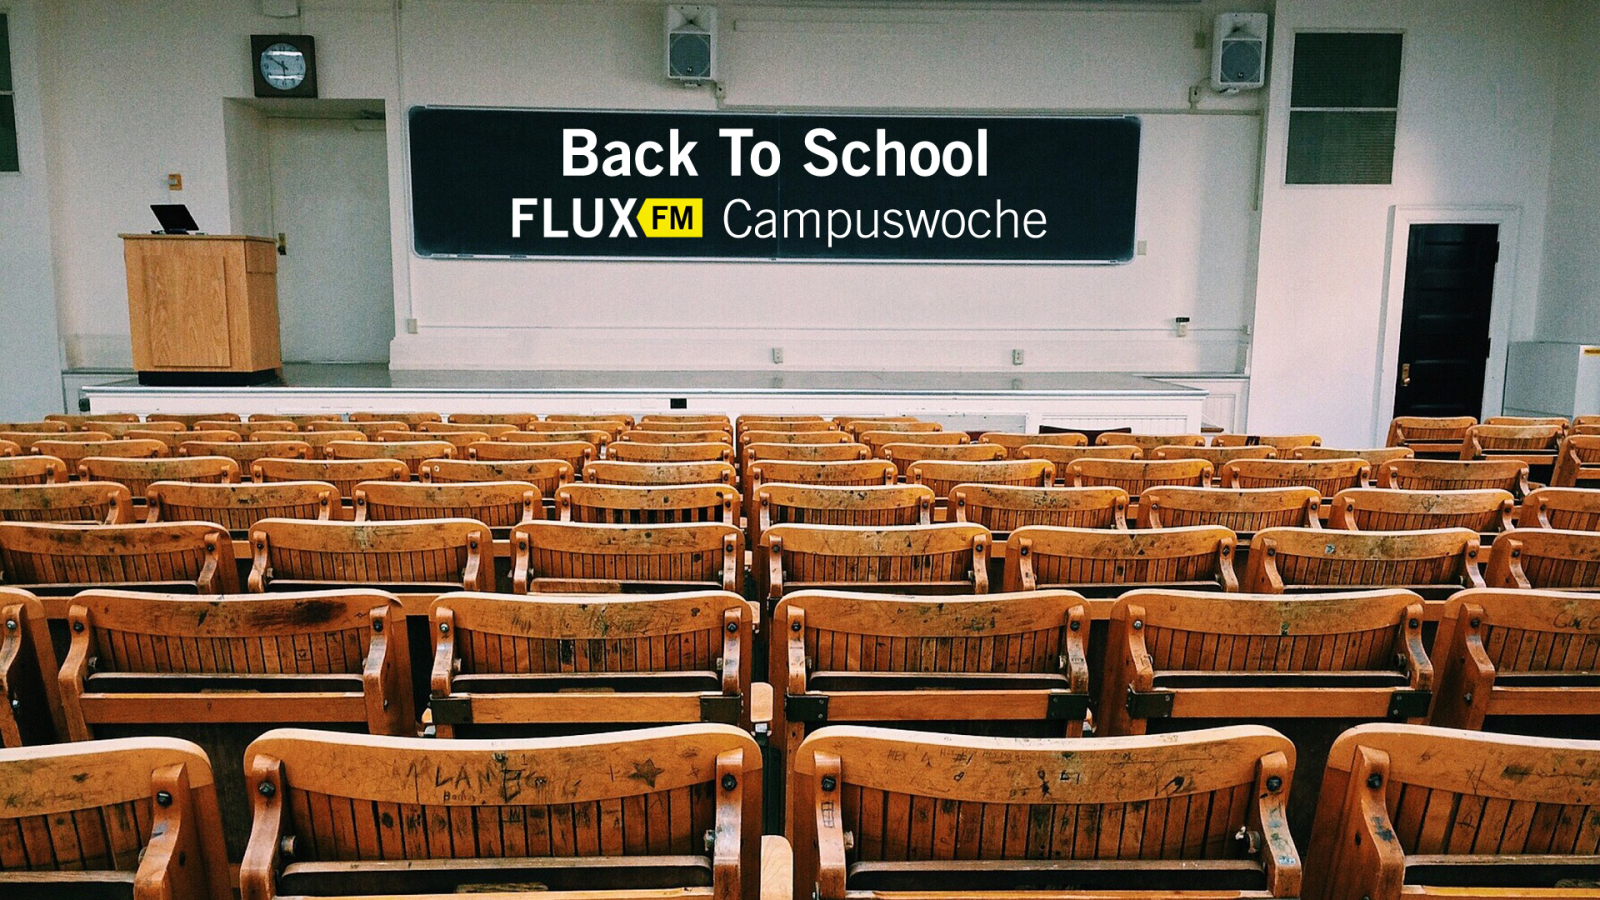 "Back To School" | FluxFM Campuswoche